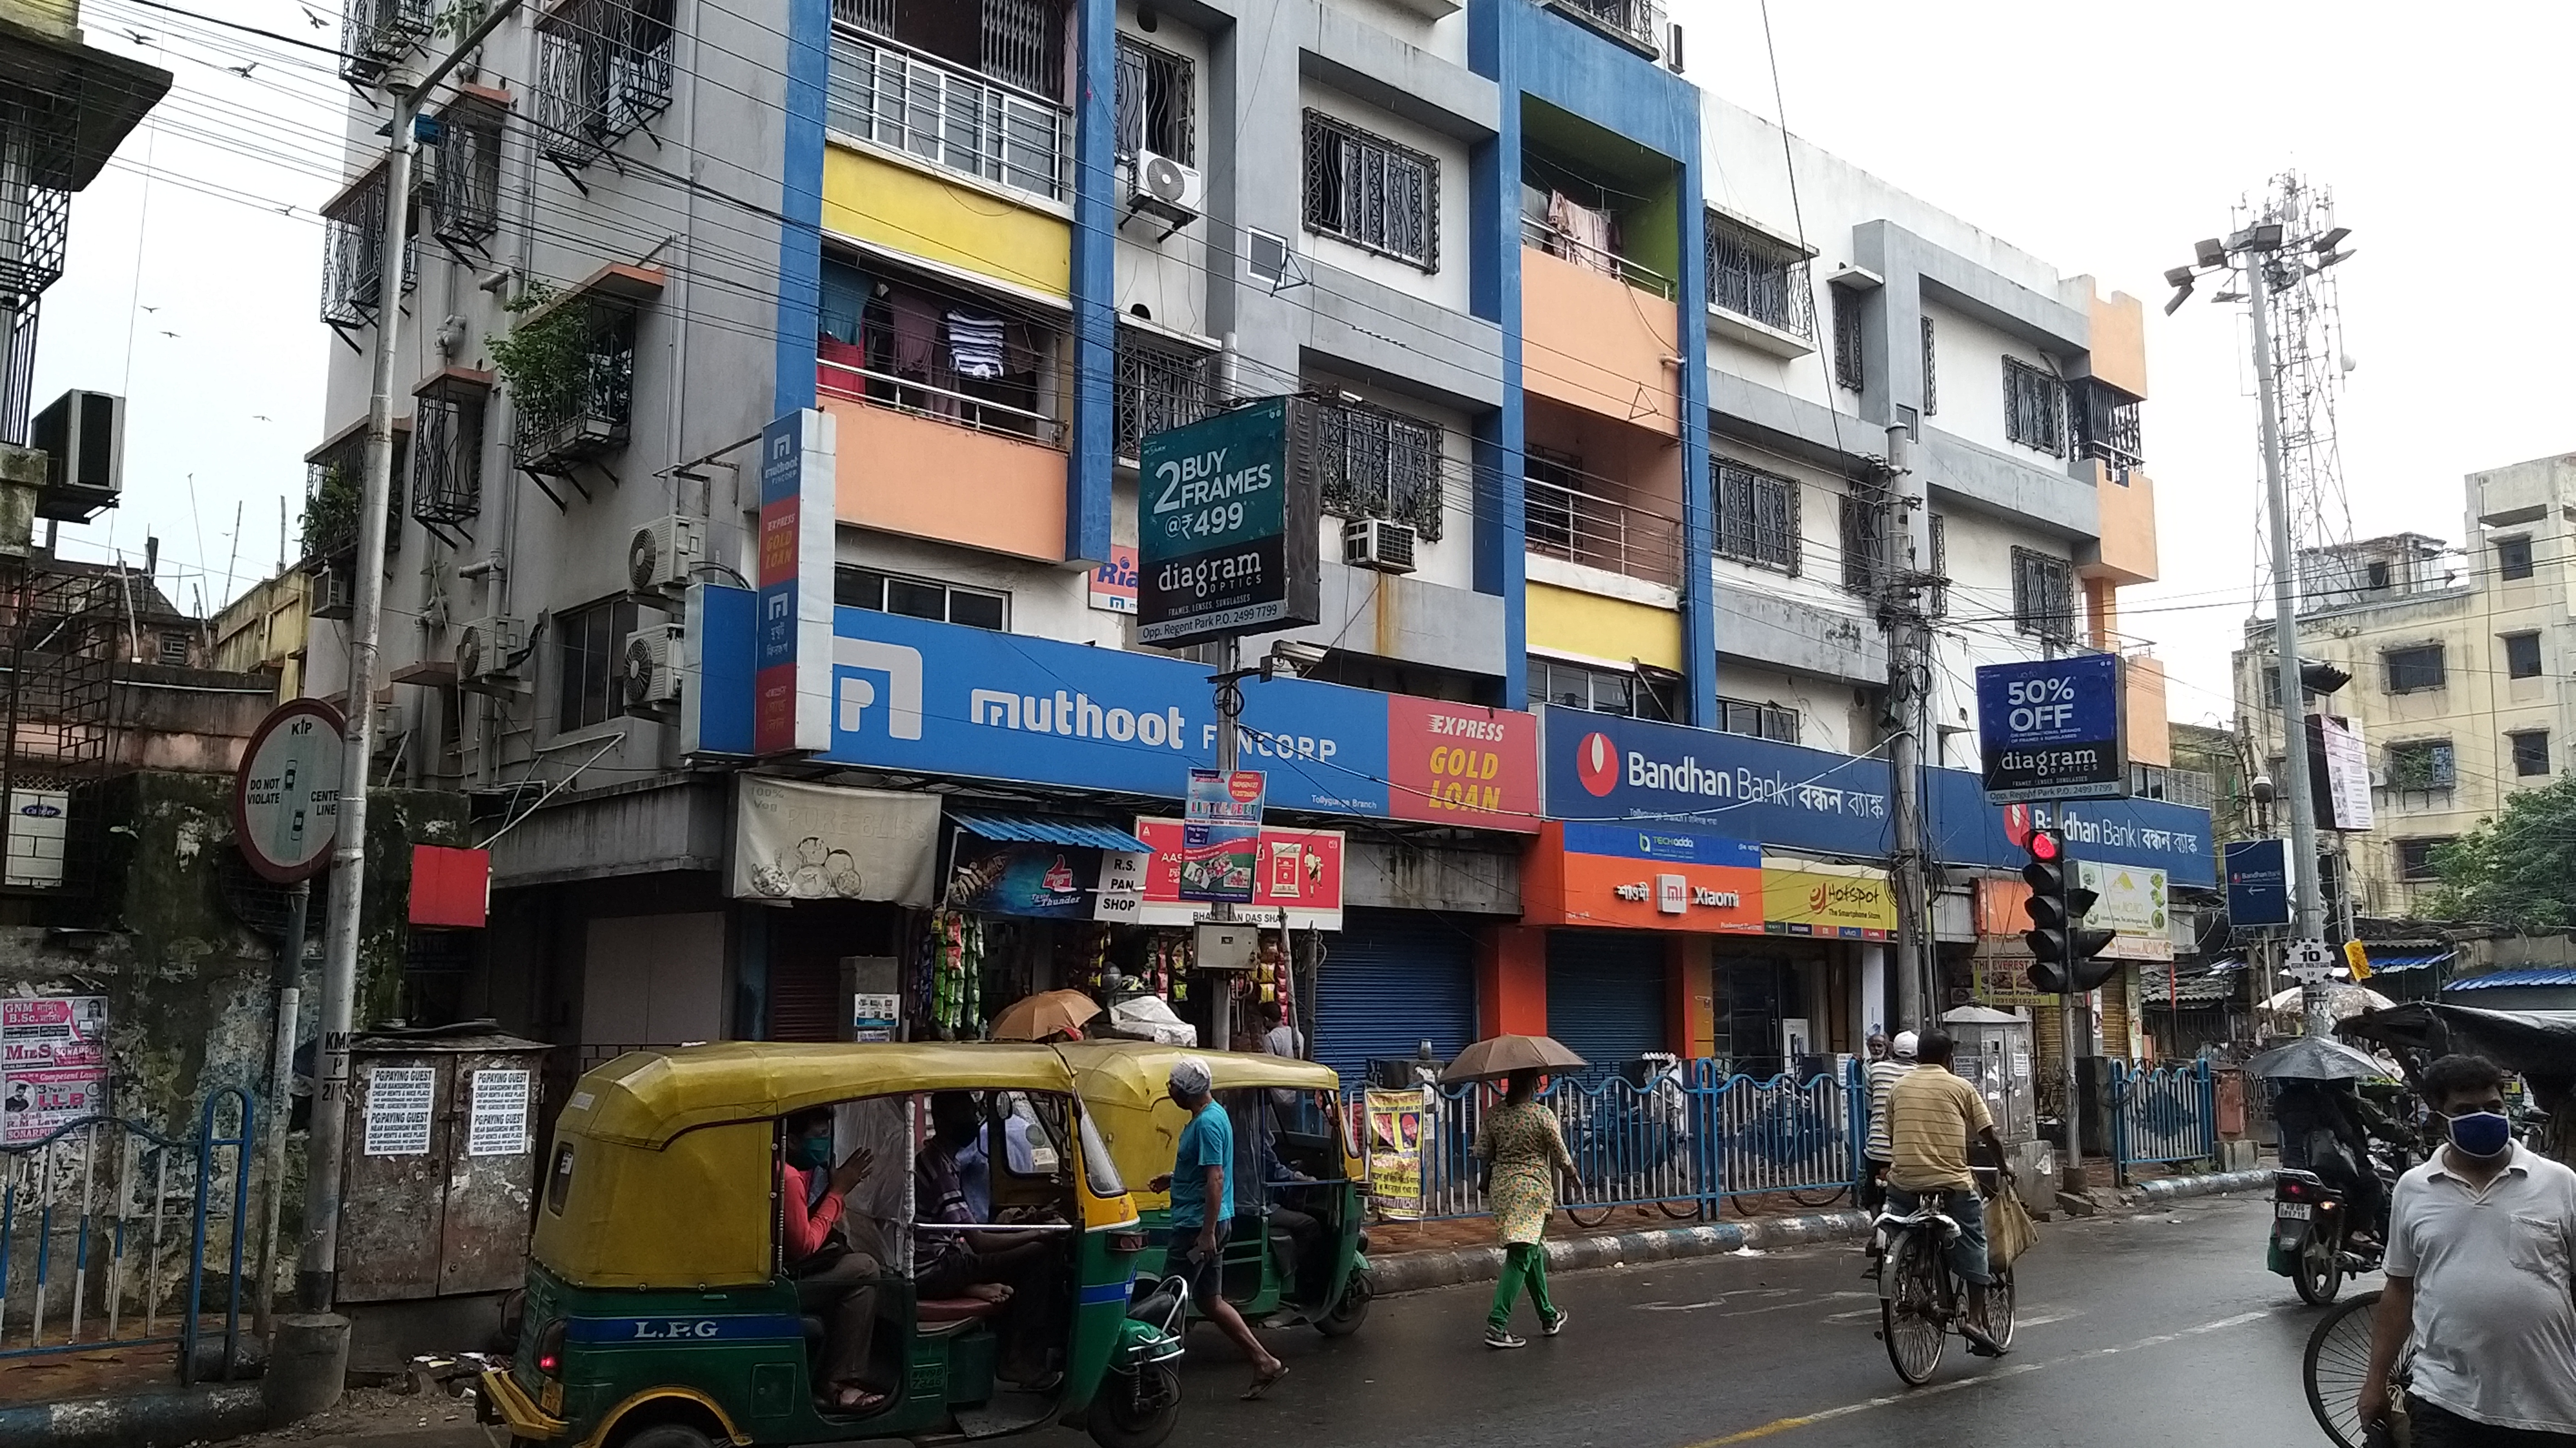 Photos and Videos of Muthoot Fincorp Gold Loan in Tollygunge, Kolkata